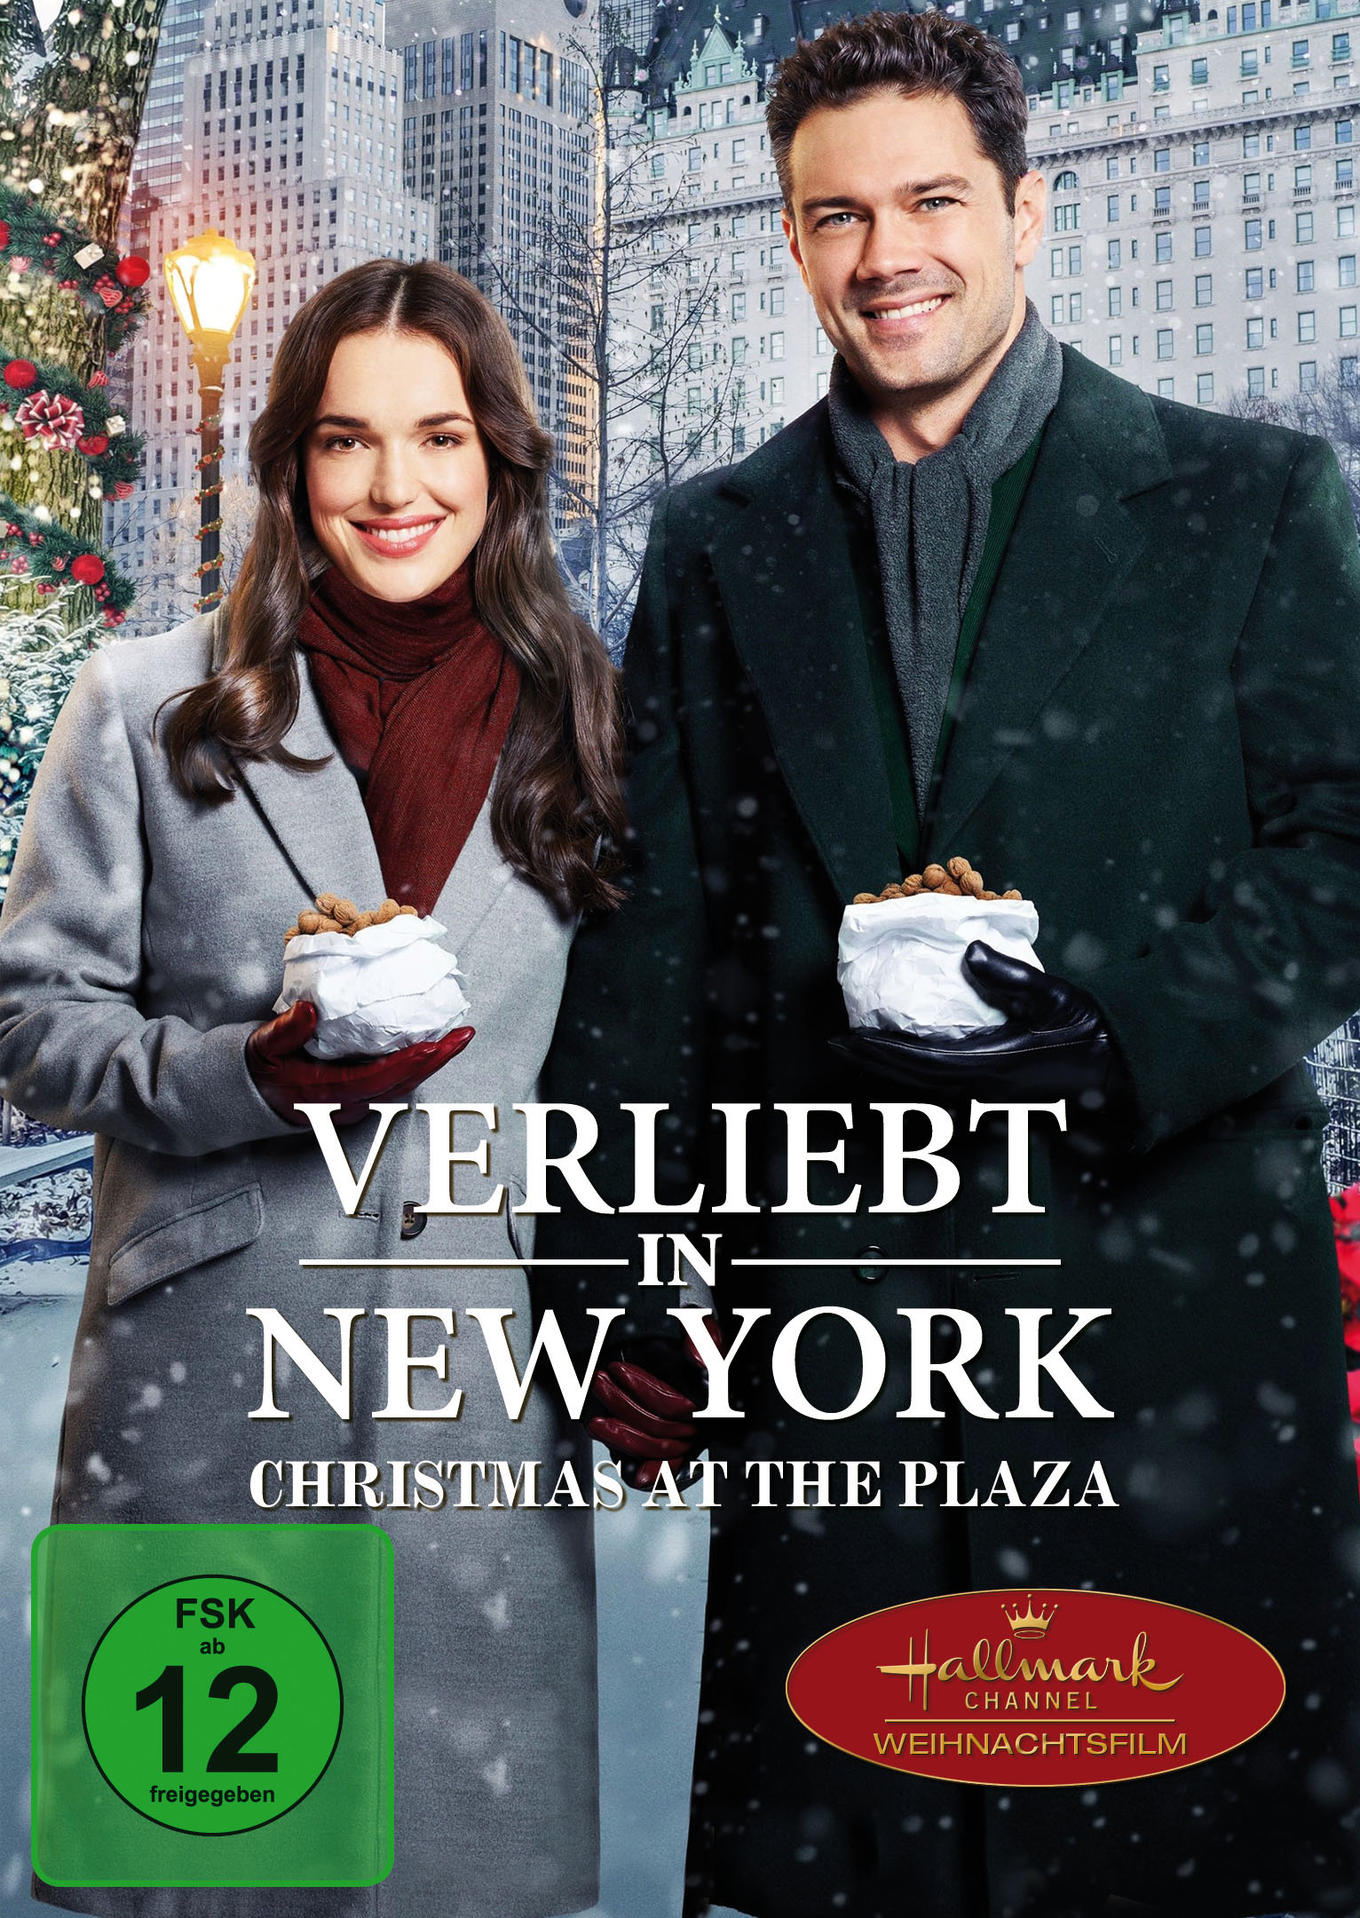 Christmas at the York New Plaza - in DVD Verliebt